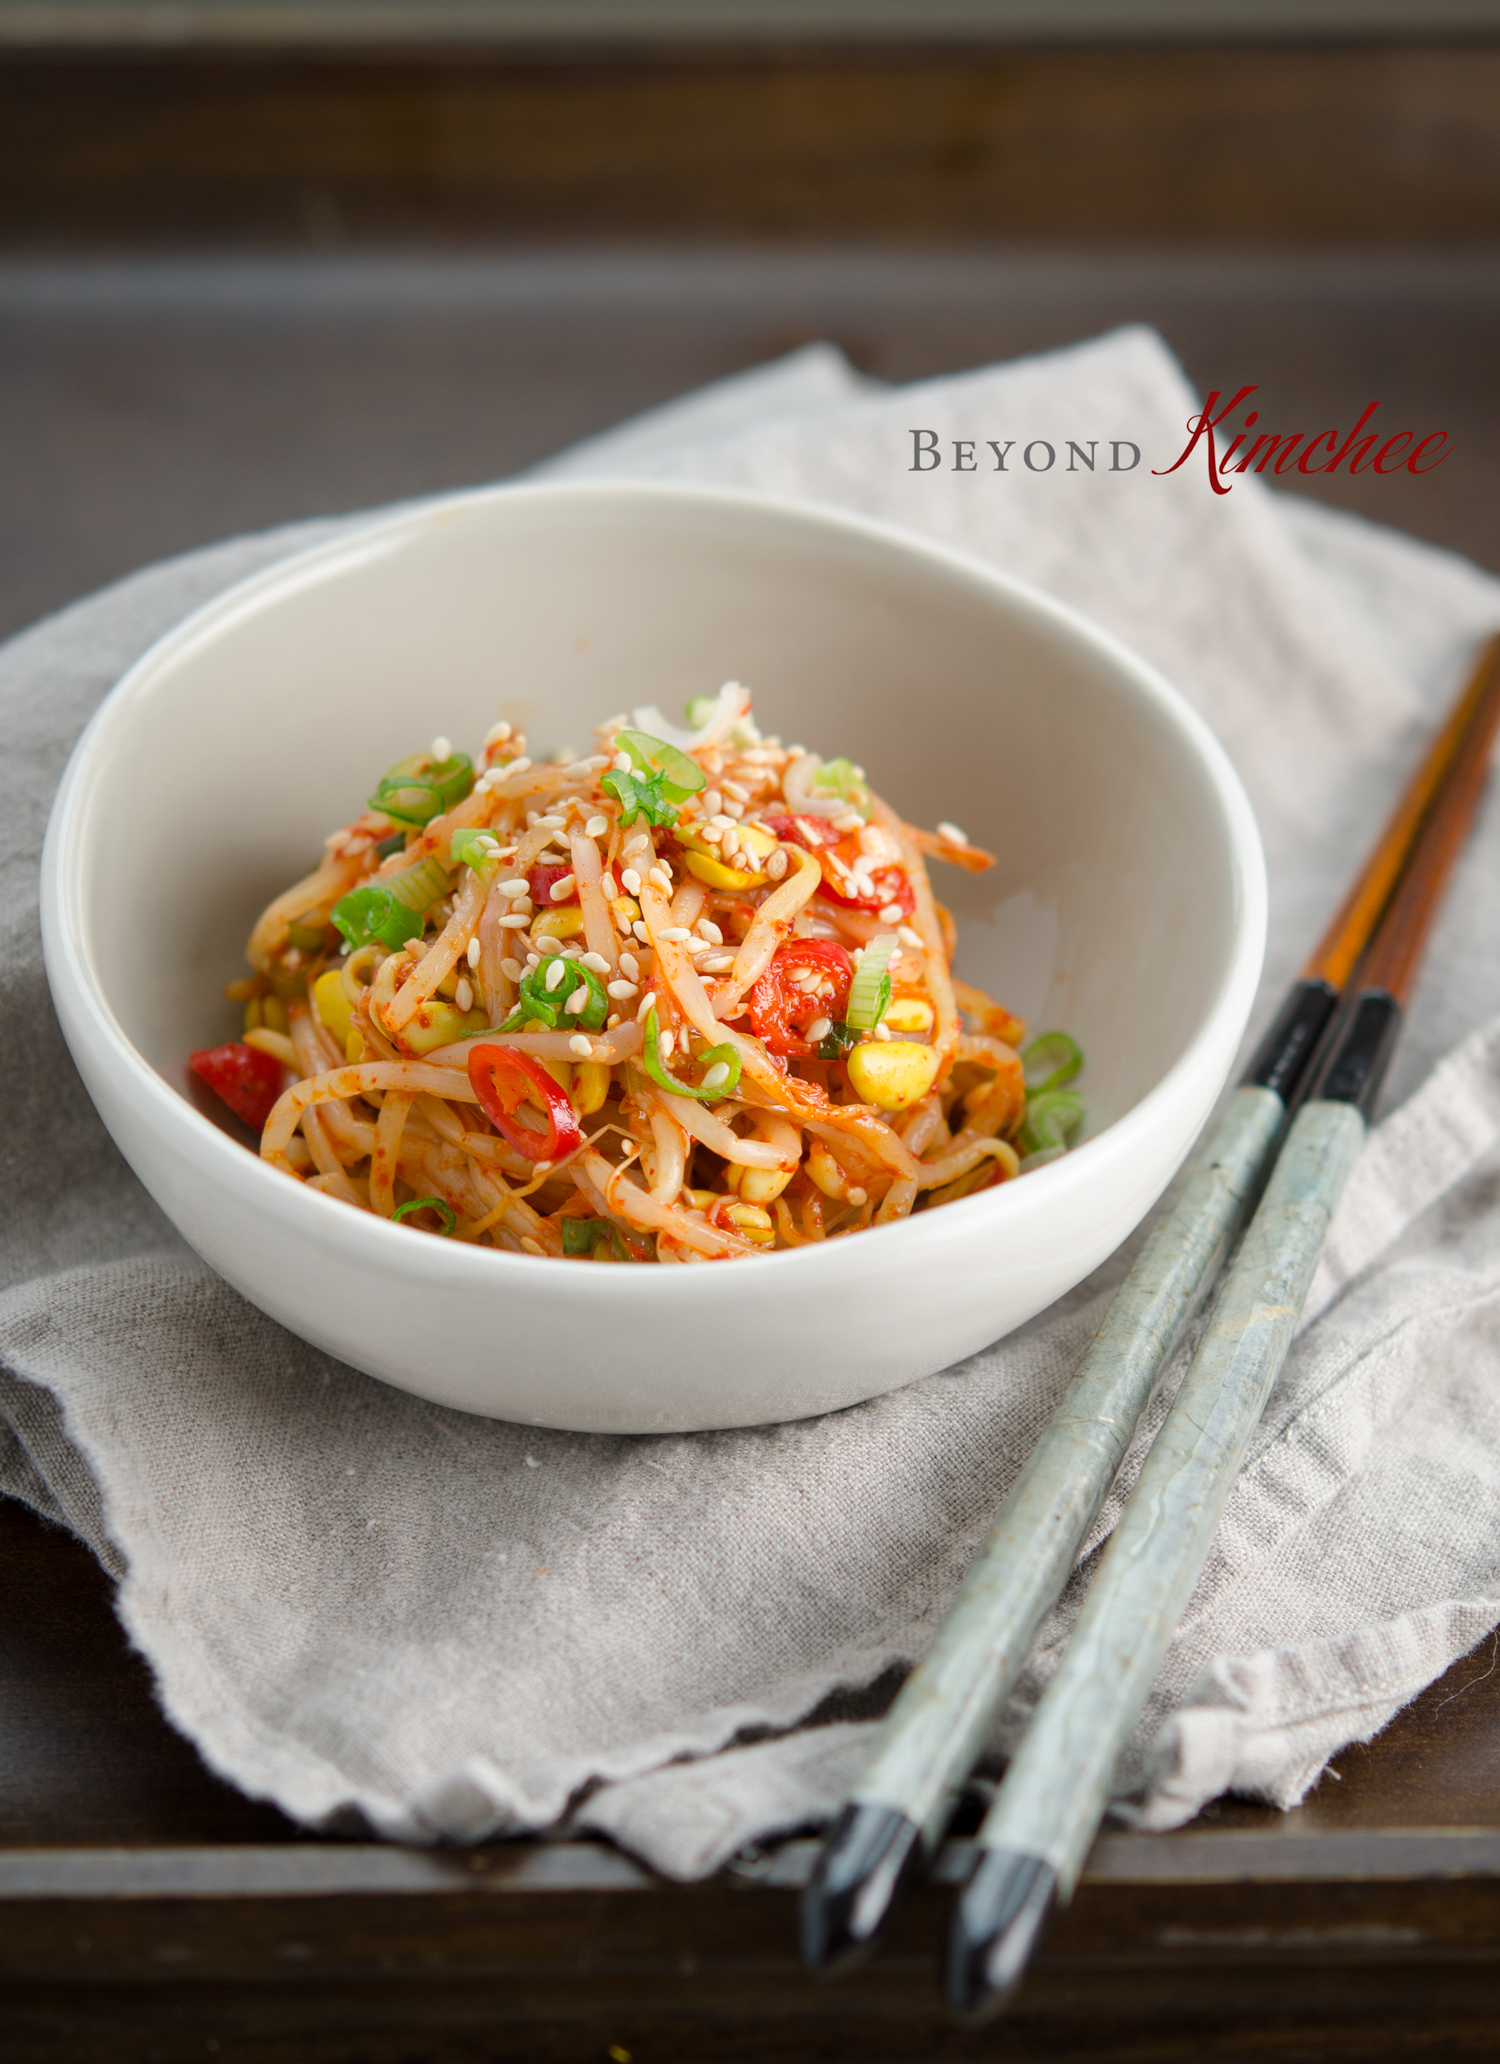 Spicy Bean Sprout salad is served in a small serving dish with napkin and chopsticks.